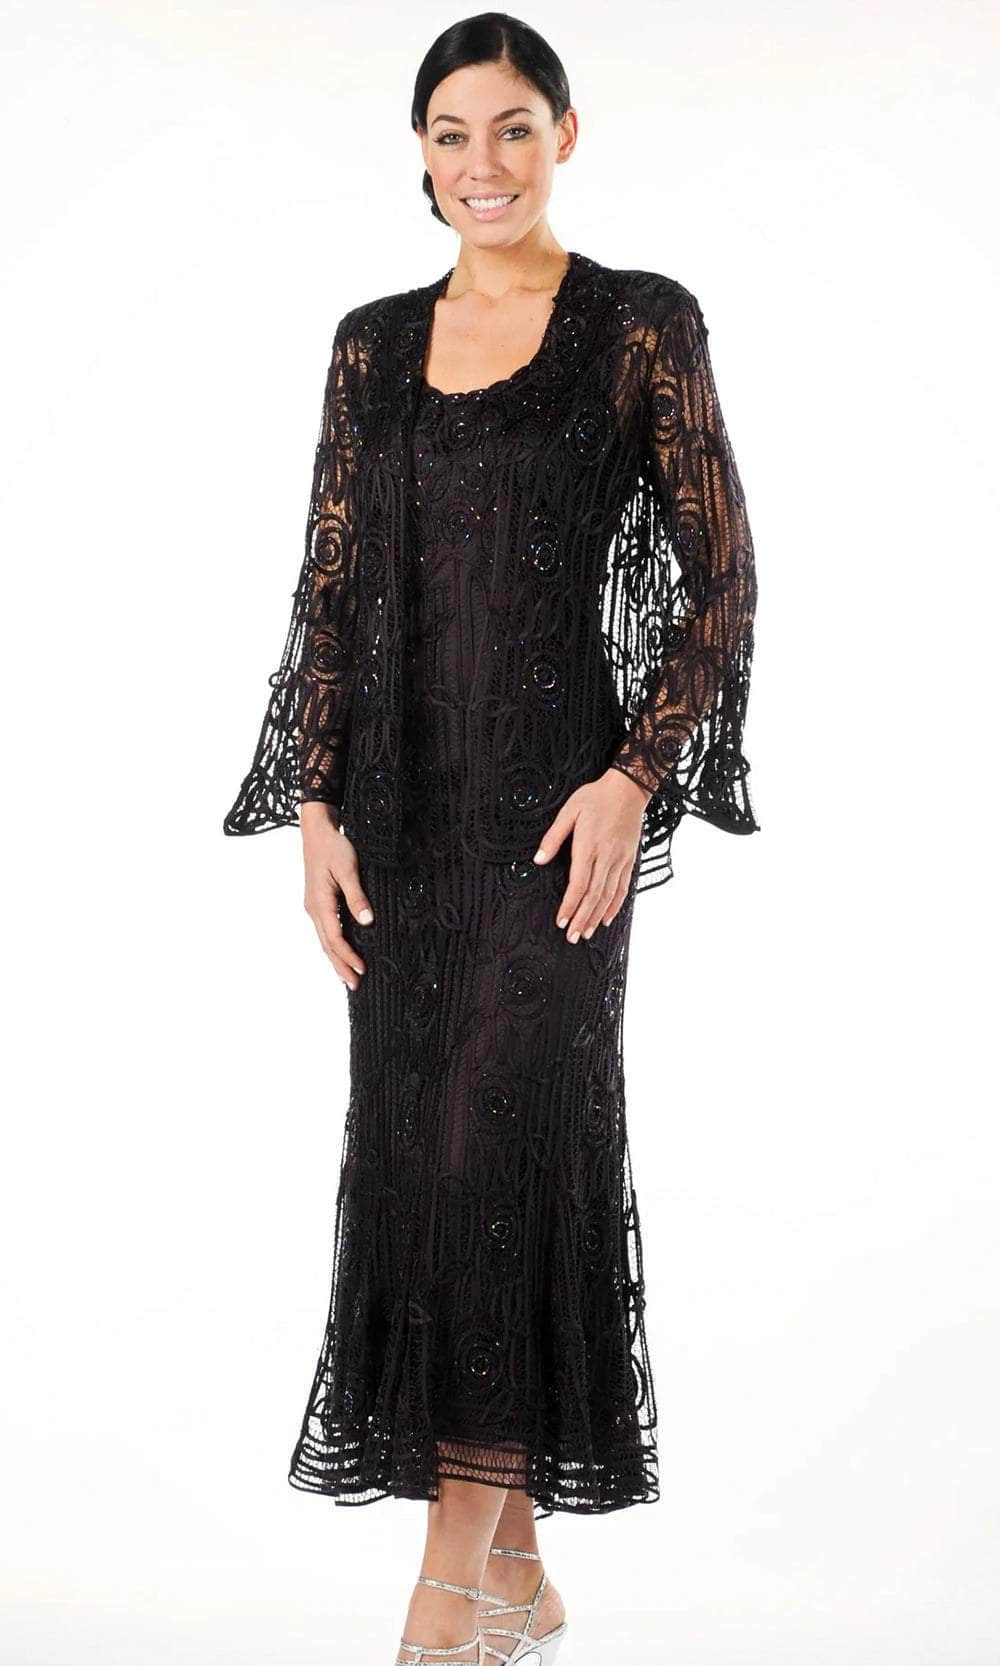 Soulmates C1068 - Beaded Silk Lace Collar Jacket With Godet Dress Set Mother of the Bride Dresses